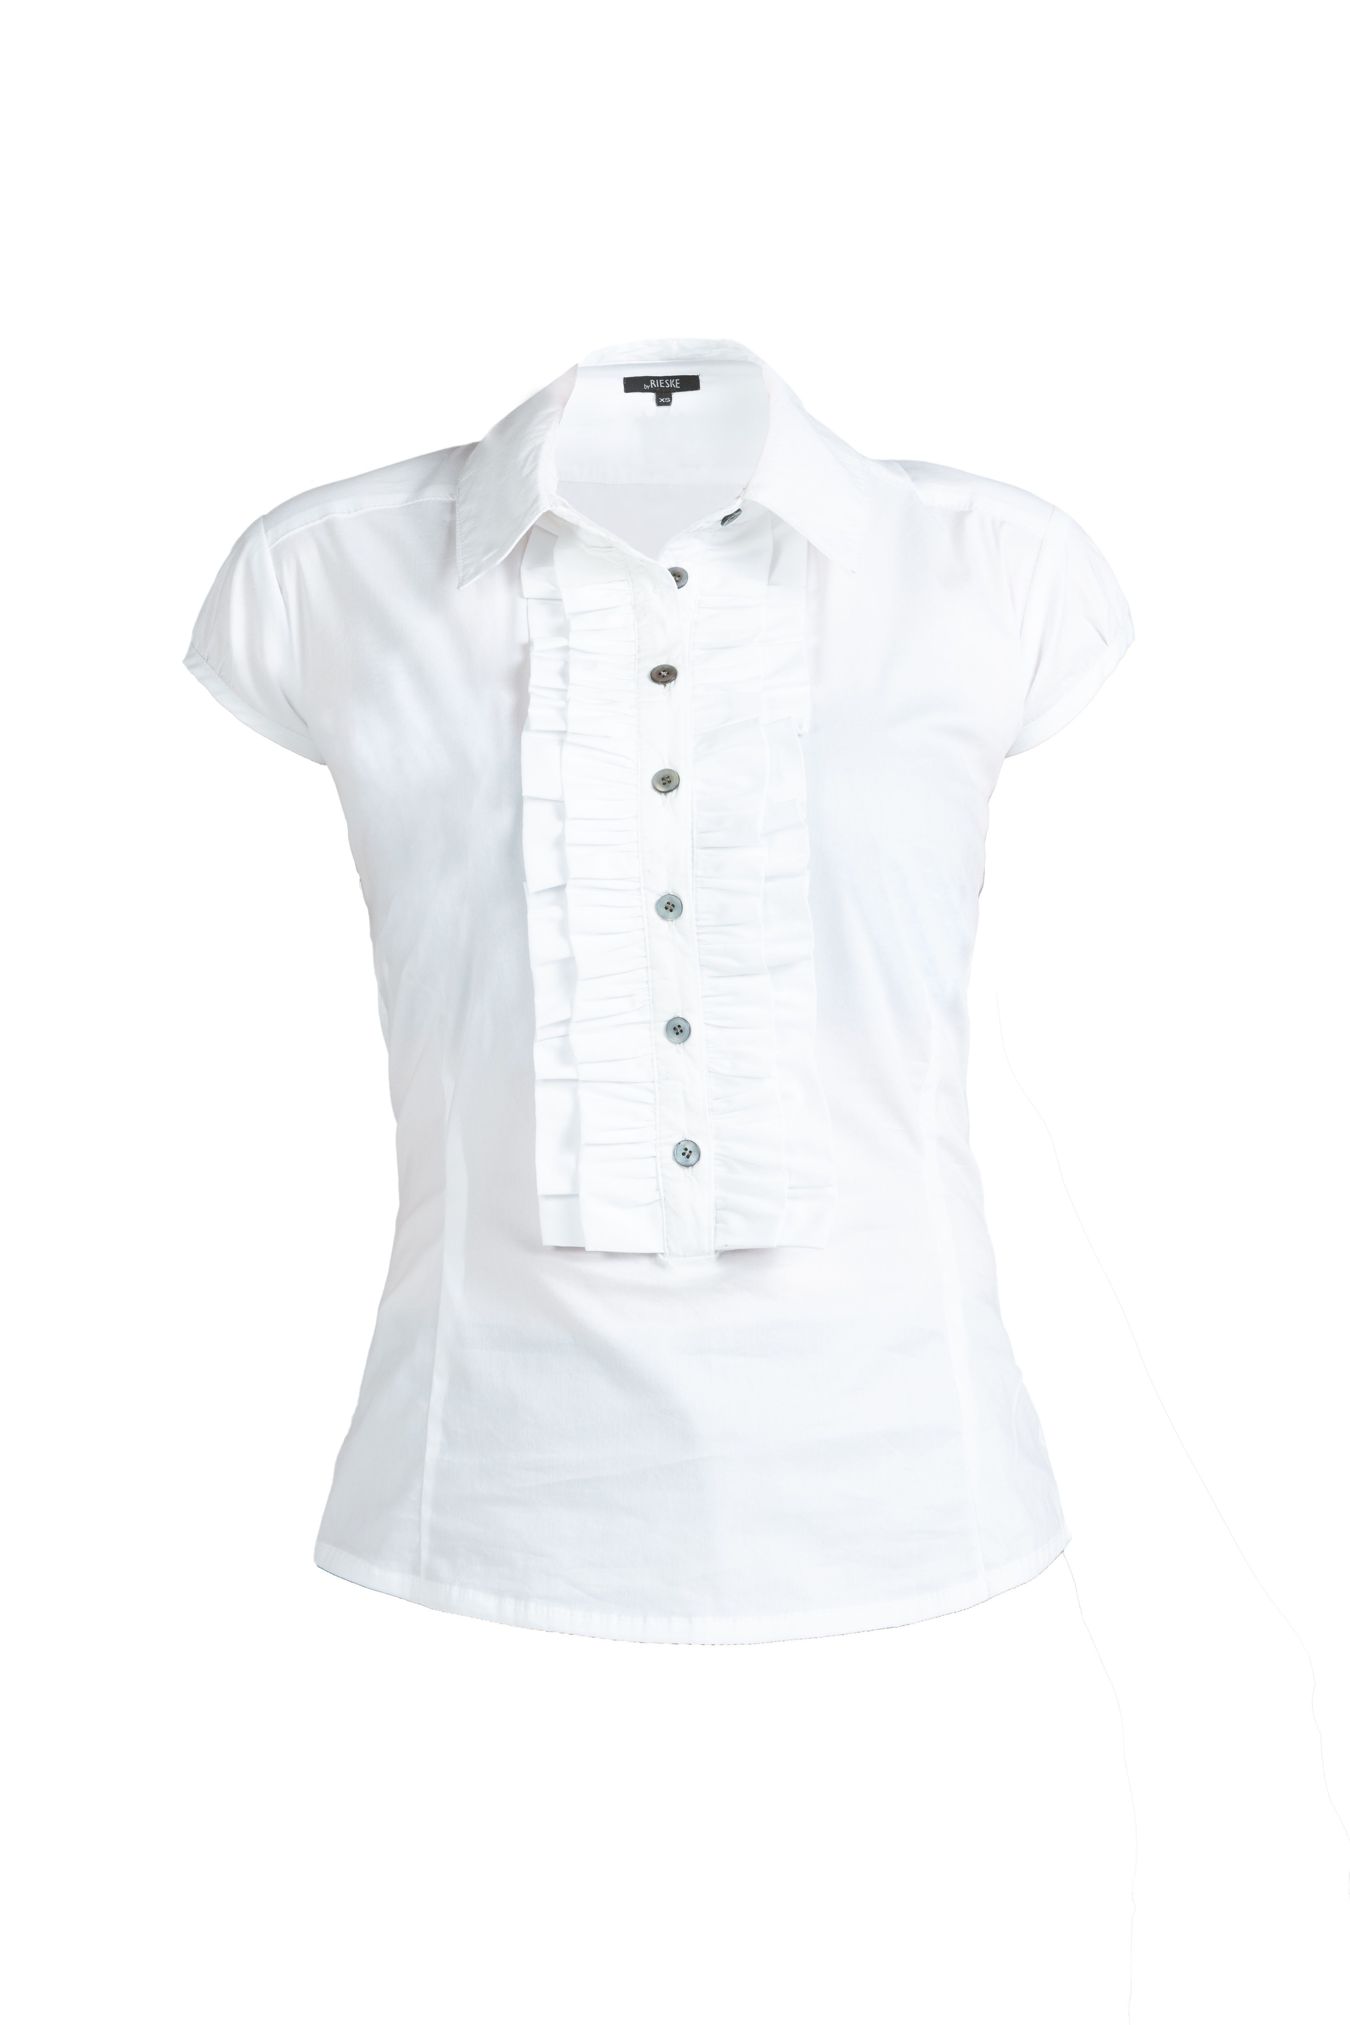 120009 RUFFLED BLOUSE WHITE - By Rieske image 2